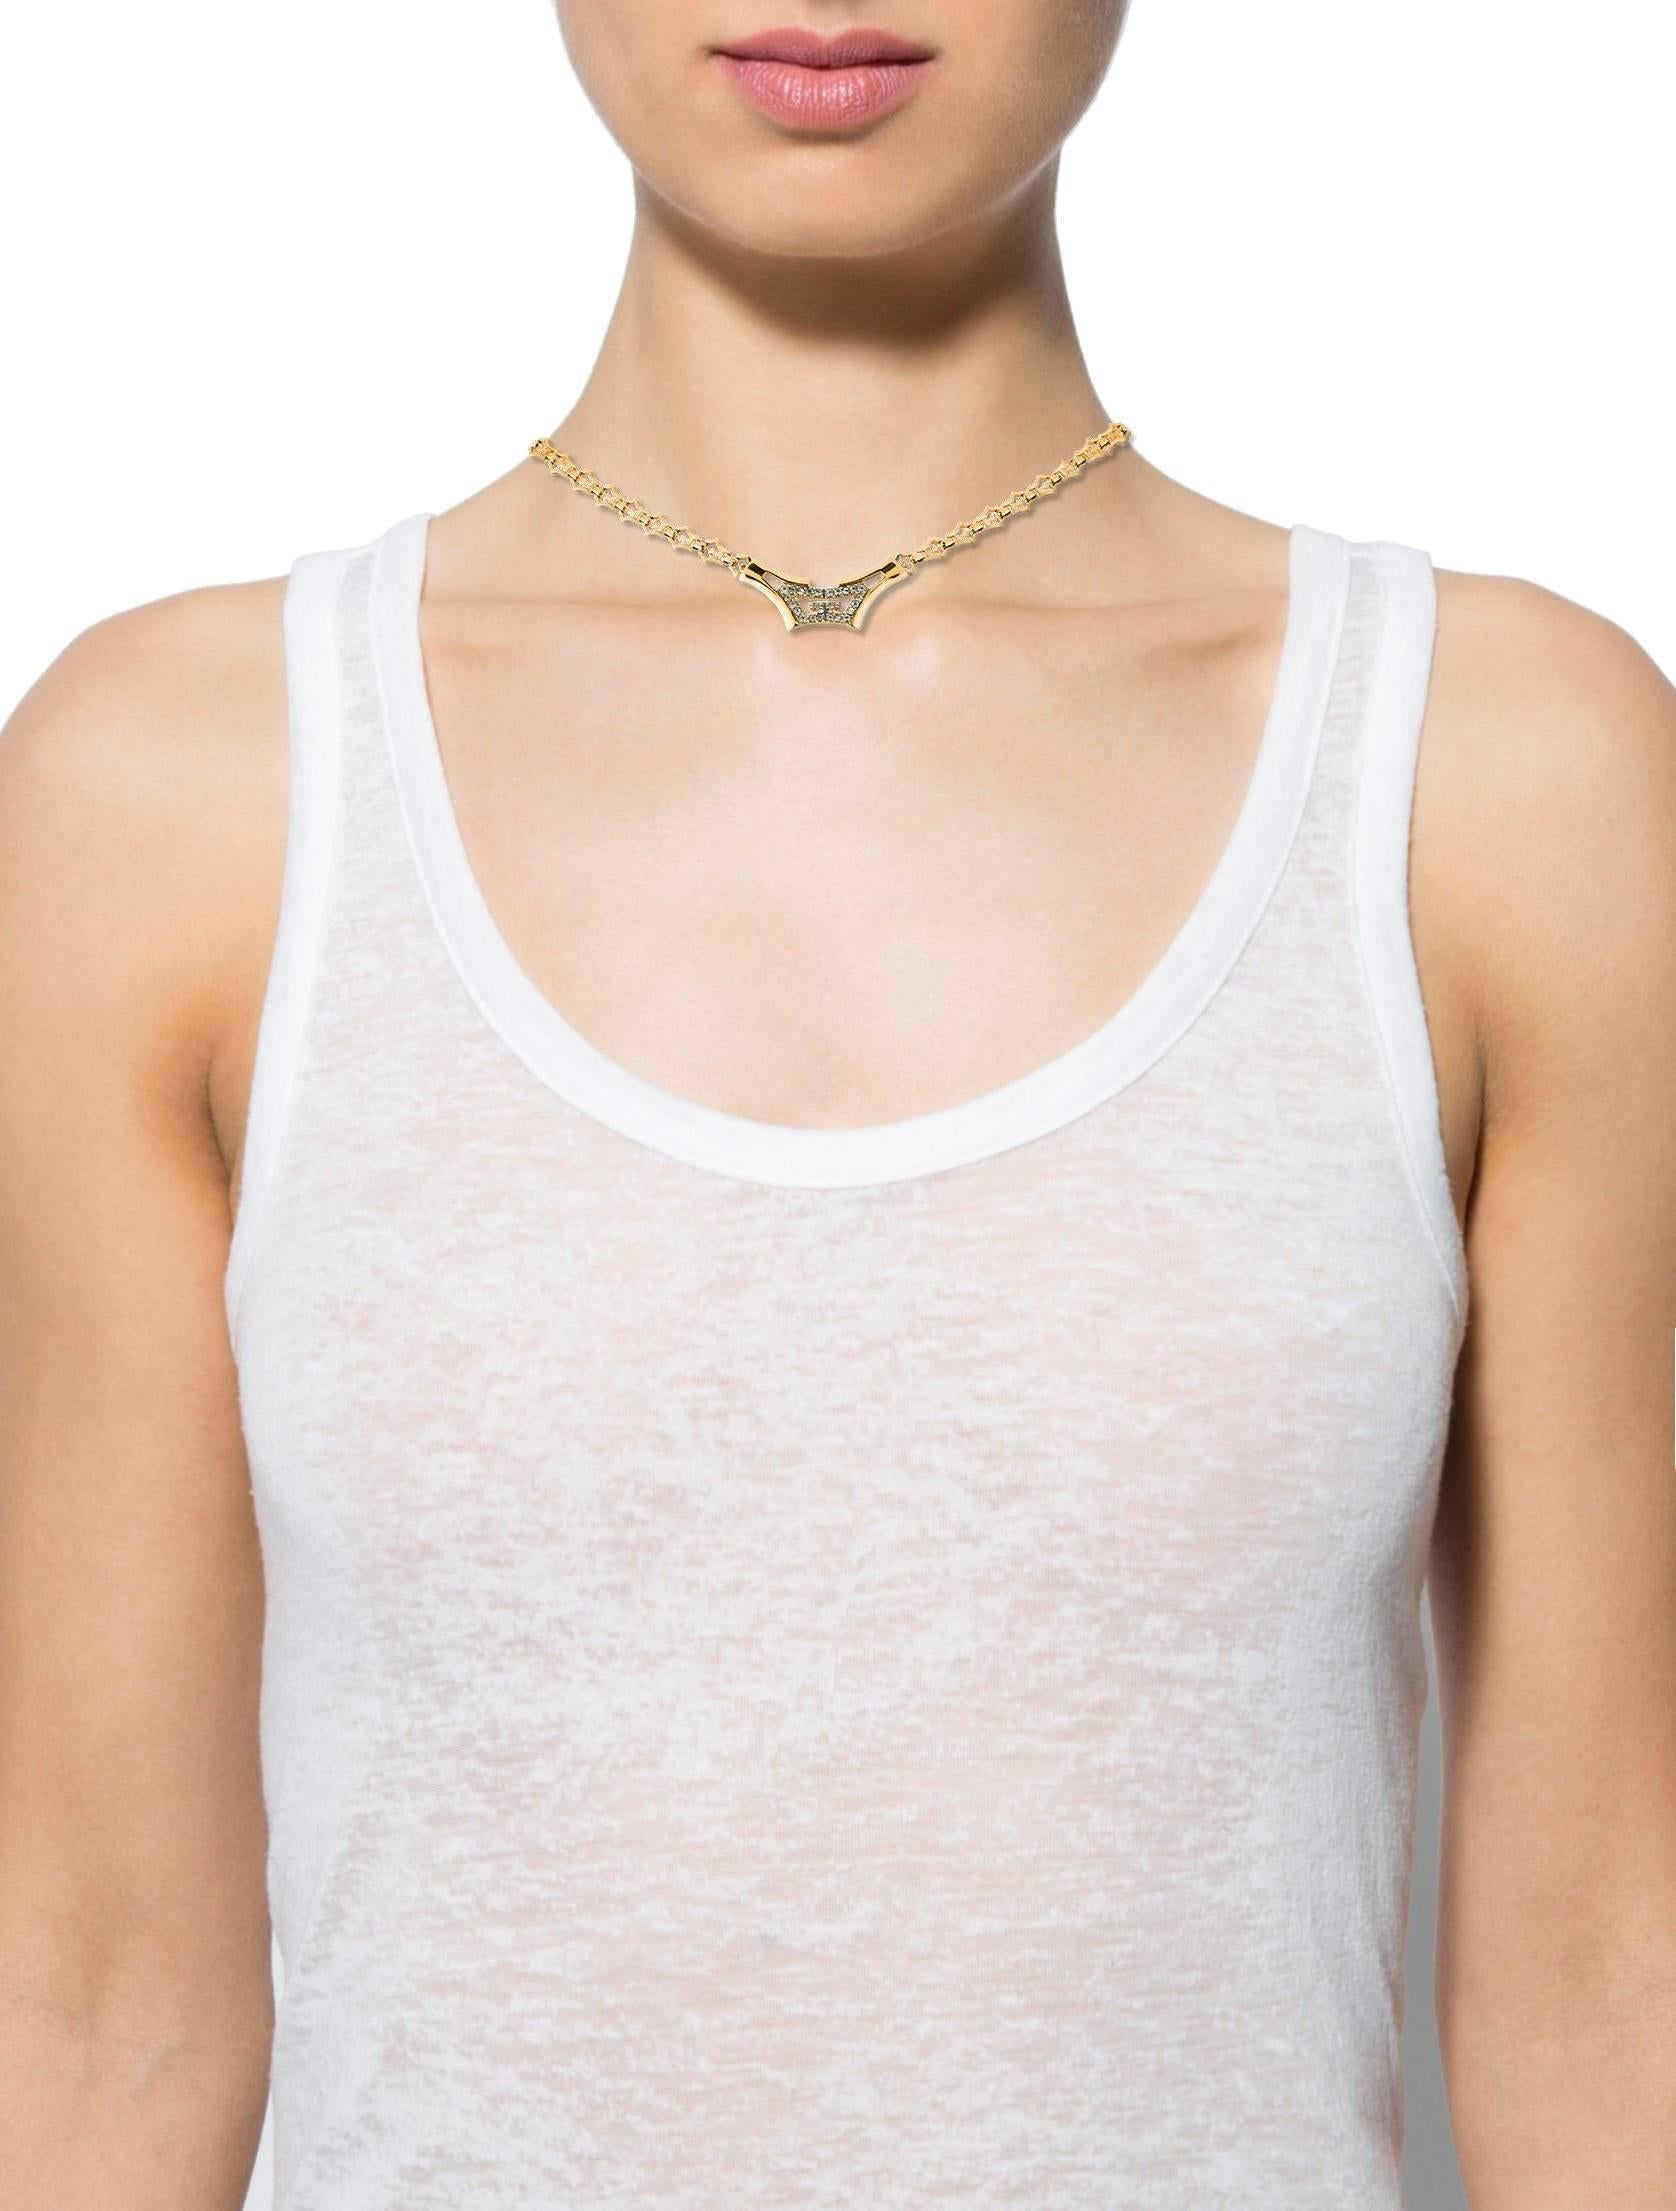 Givenchy Gold Chain GG Charm Pendant Crystal Choker Chain Evening Necklace 

Style Tip: The perfect necklace for layering!

Metal
Crystal
Gold tone
Hinge closure
Signed Givenchy
Total length 14